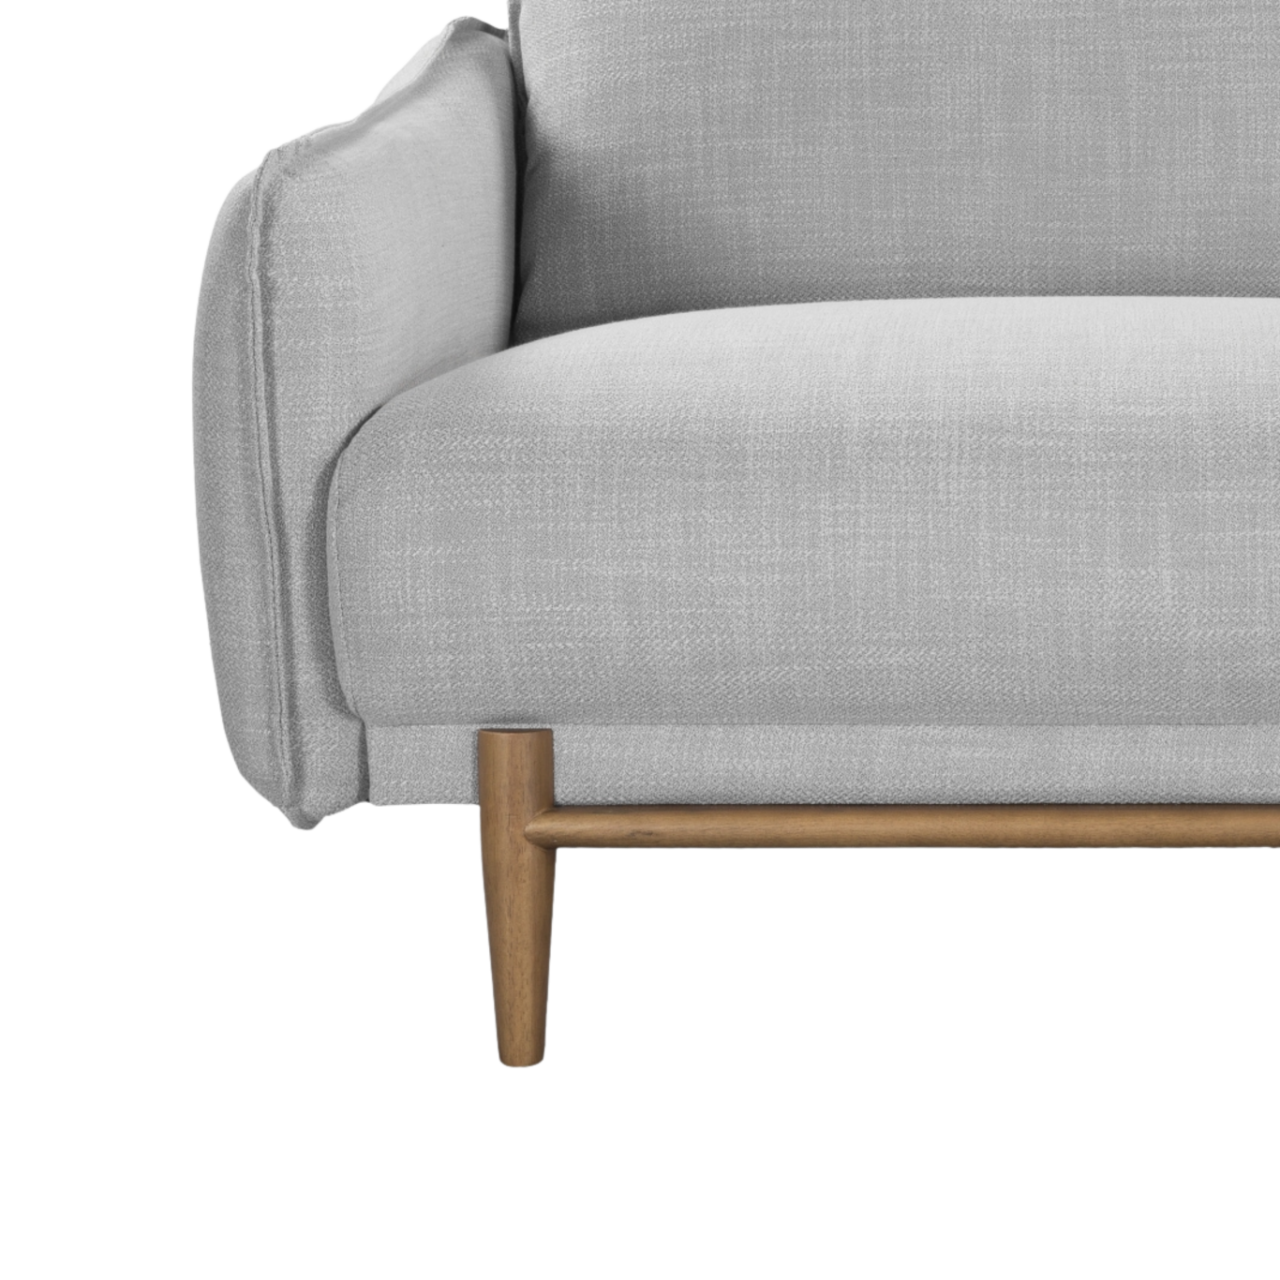 detail view of modern comfy 3 seater sofa upholstered in grey linen fabric